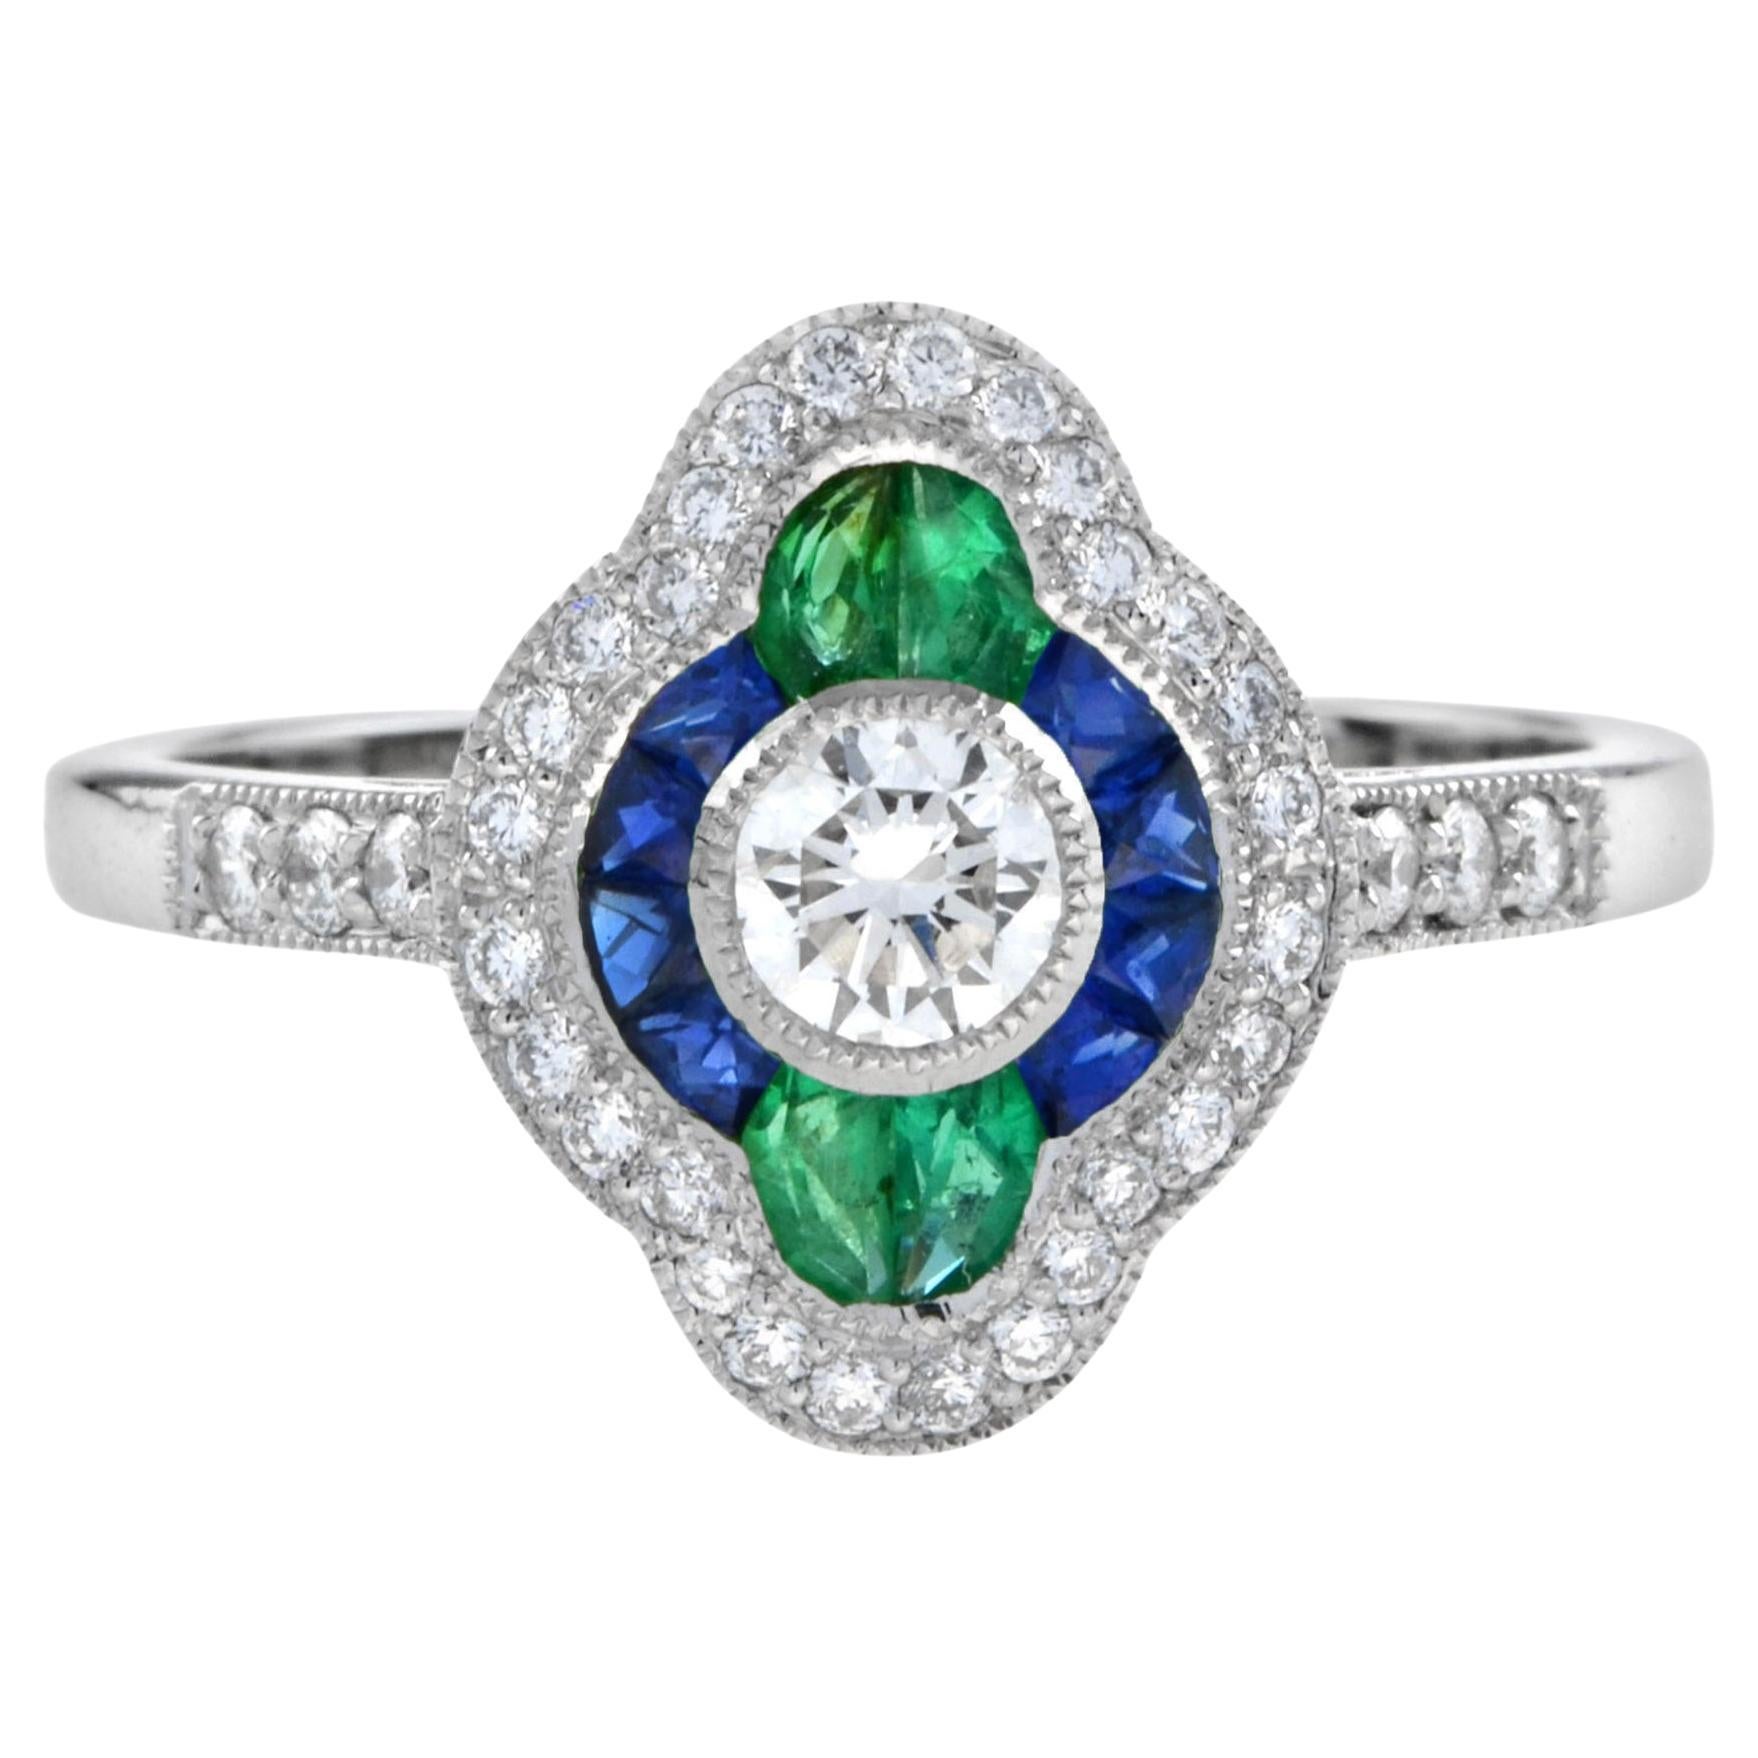 For Sale:  Diamond Sapphire Emerald Art Deco Style Engagement Ring in 18k White Gold